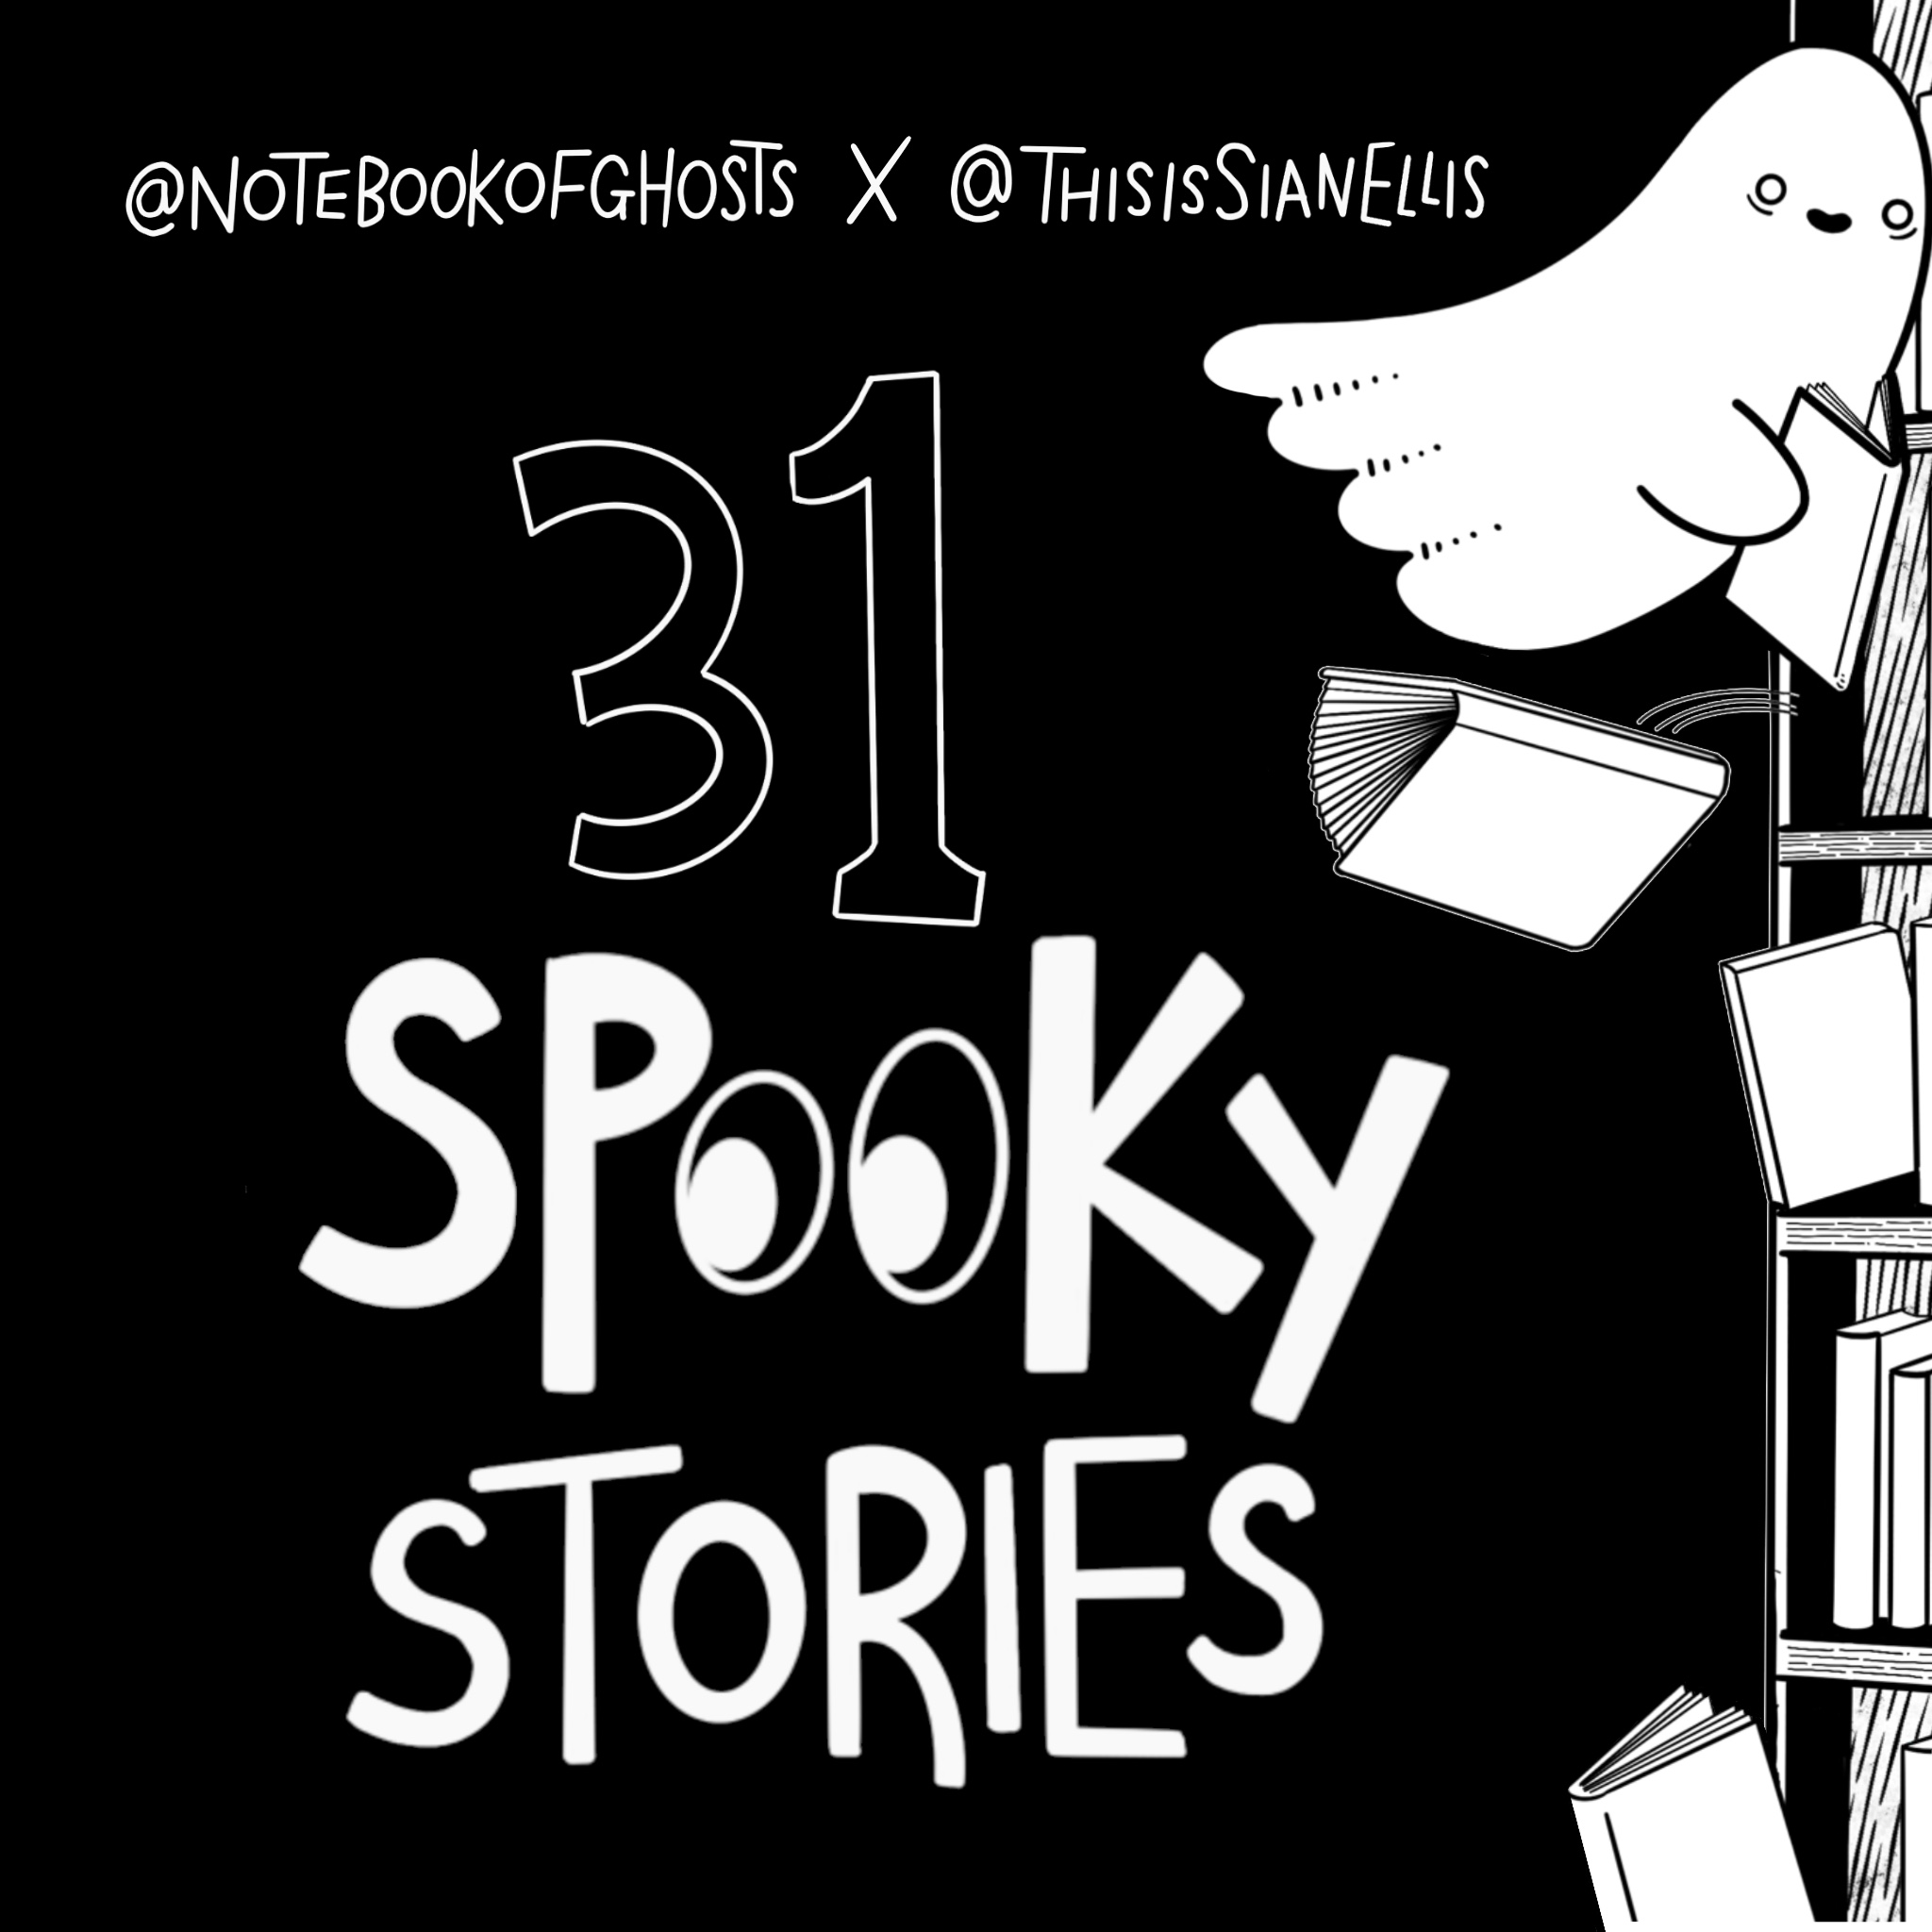 31 Spooky Stories Collab with Notebook of Ghosts